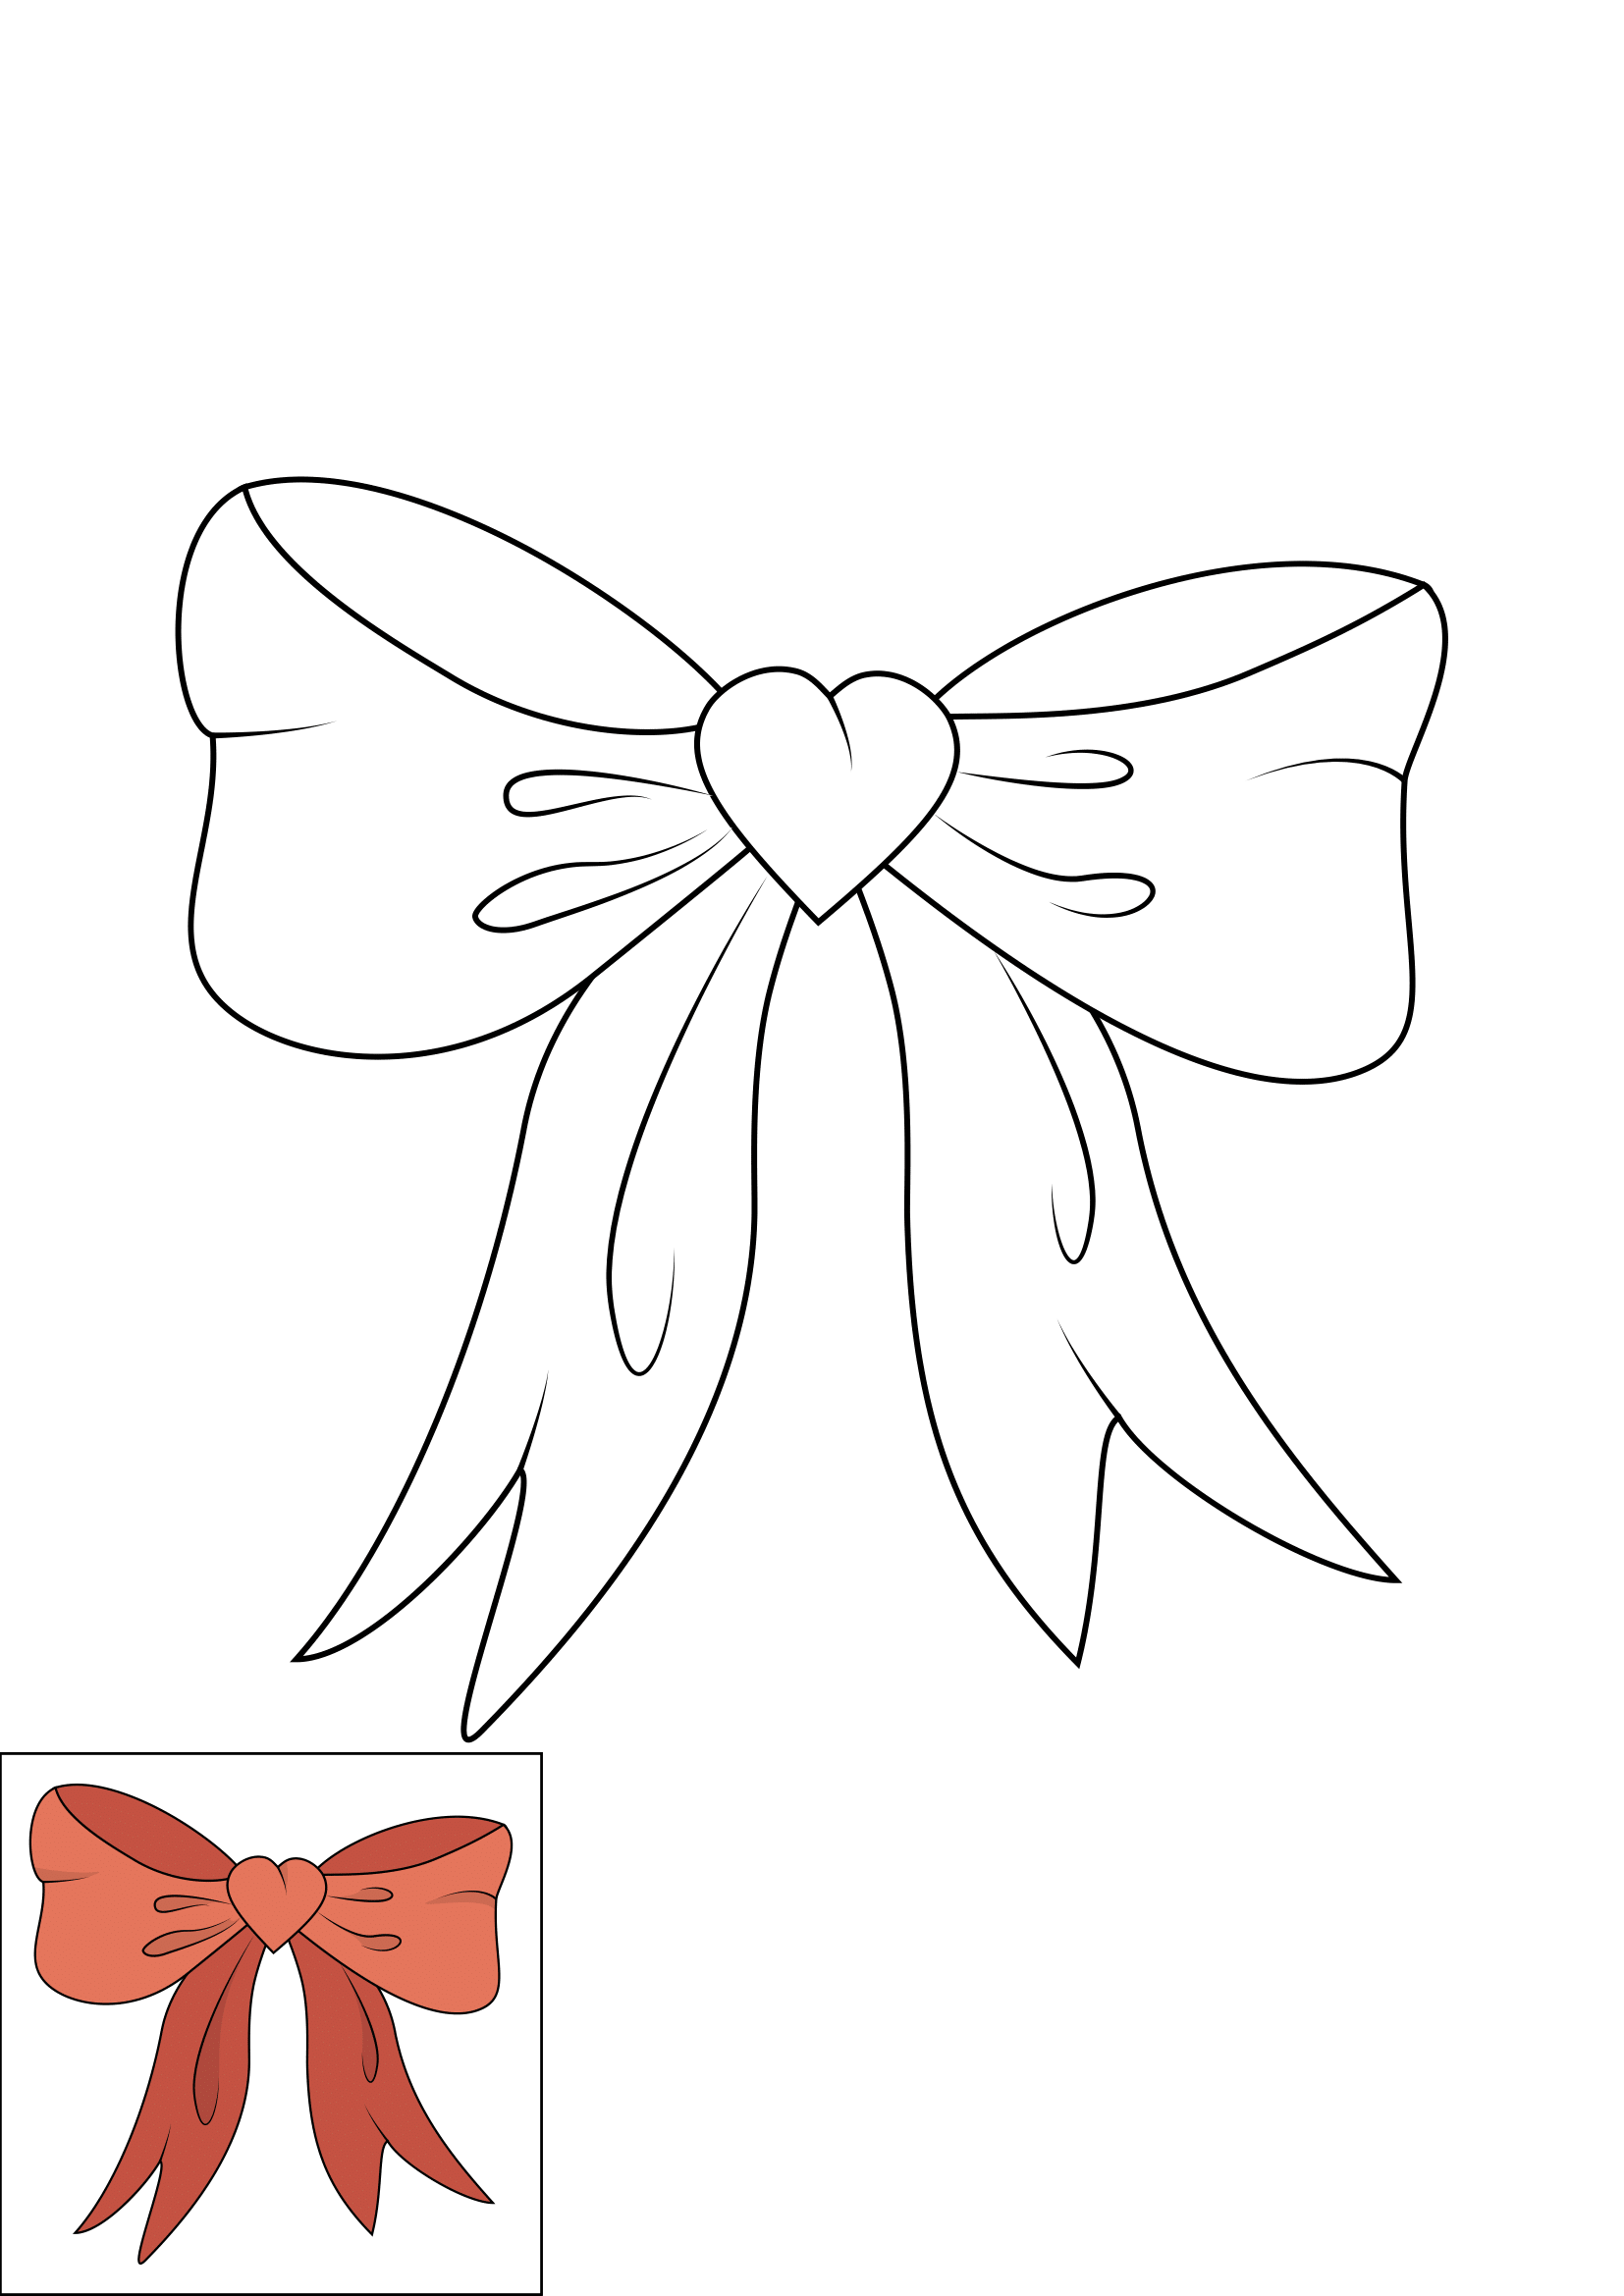 How to Draw A Bow Step by Step Printable Color